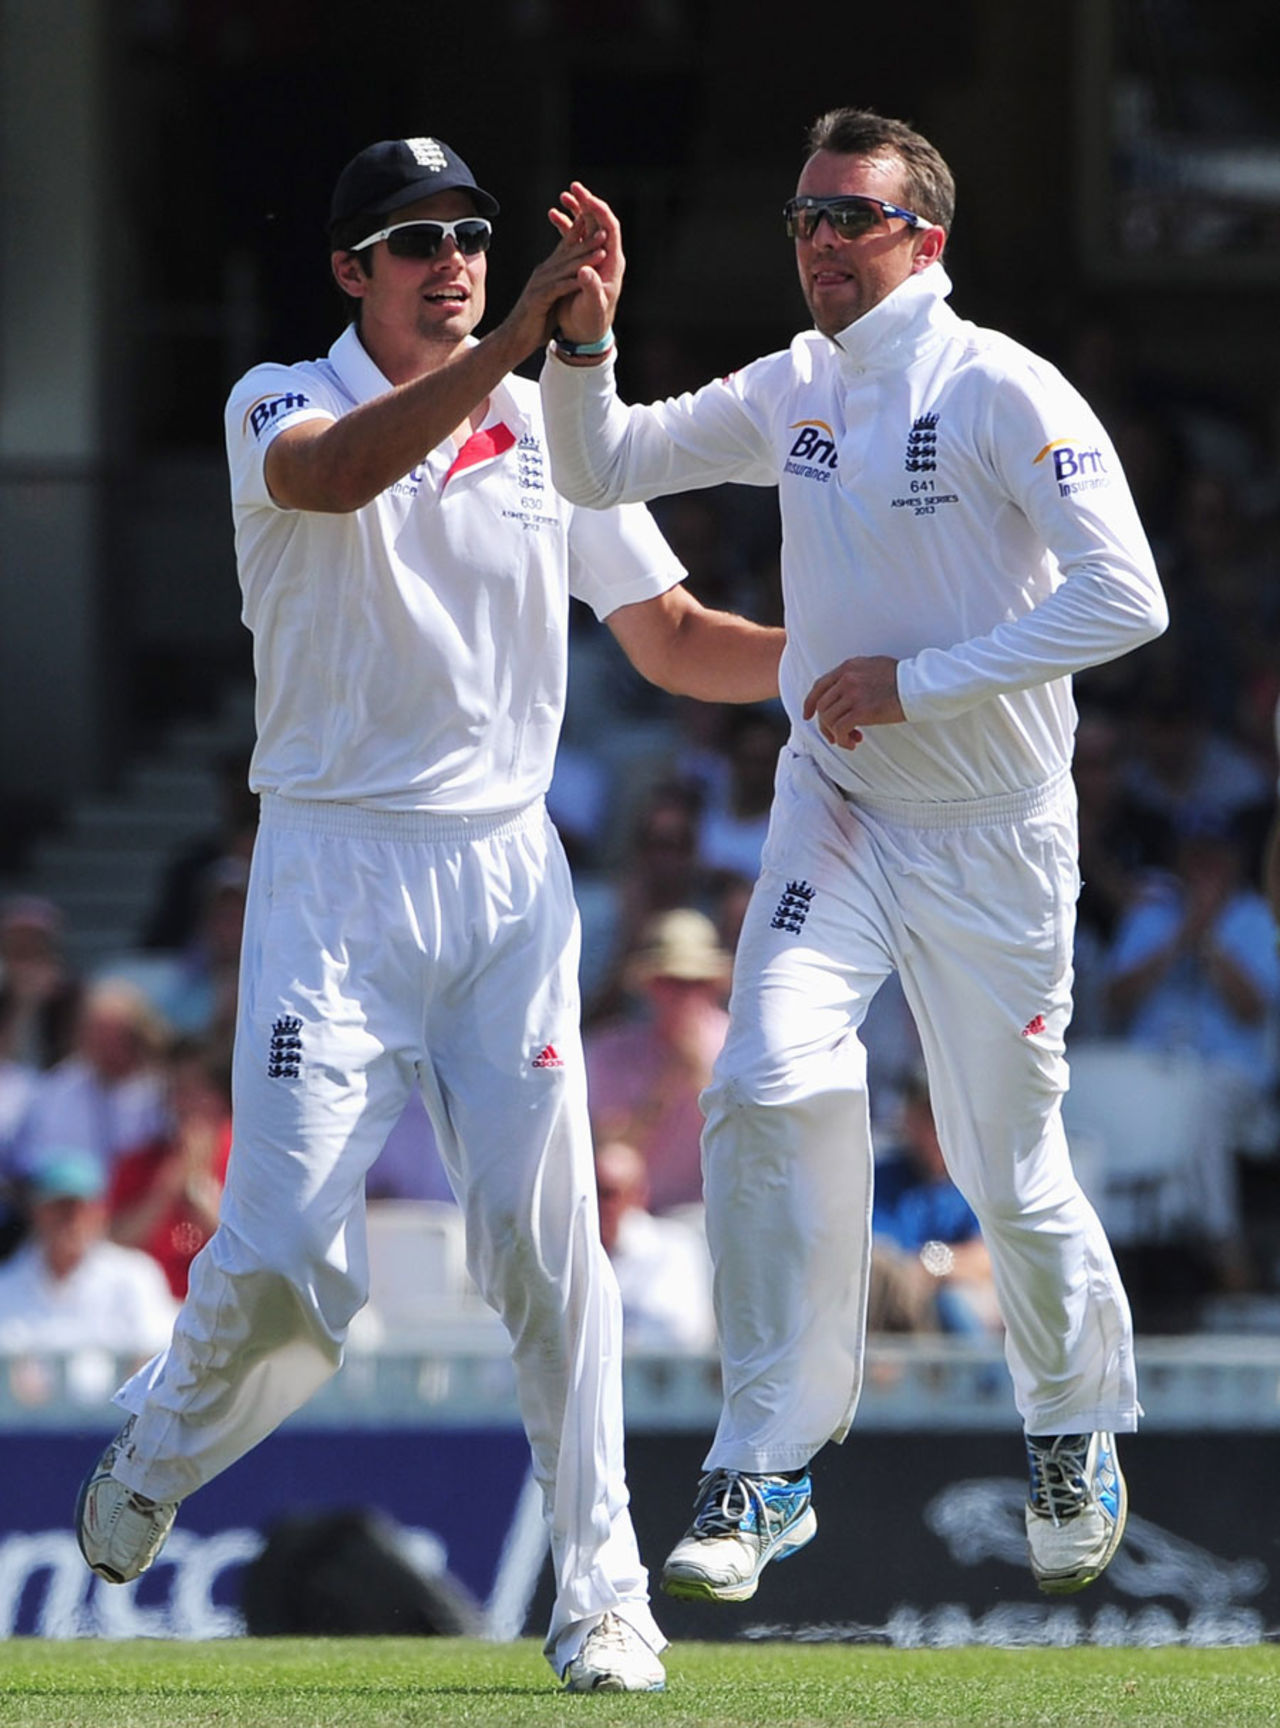 Graeme Swann broke a 107-run stand for the second wicket, England v Australia, 5th Investec Test, The Oval, 1st day, August 21, 2013